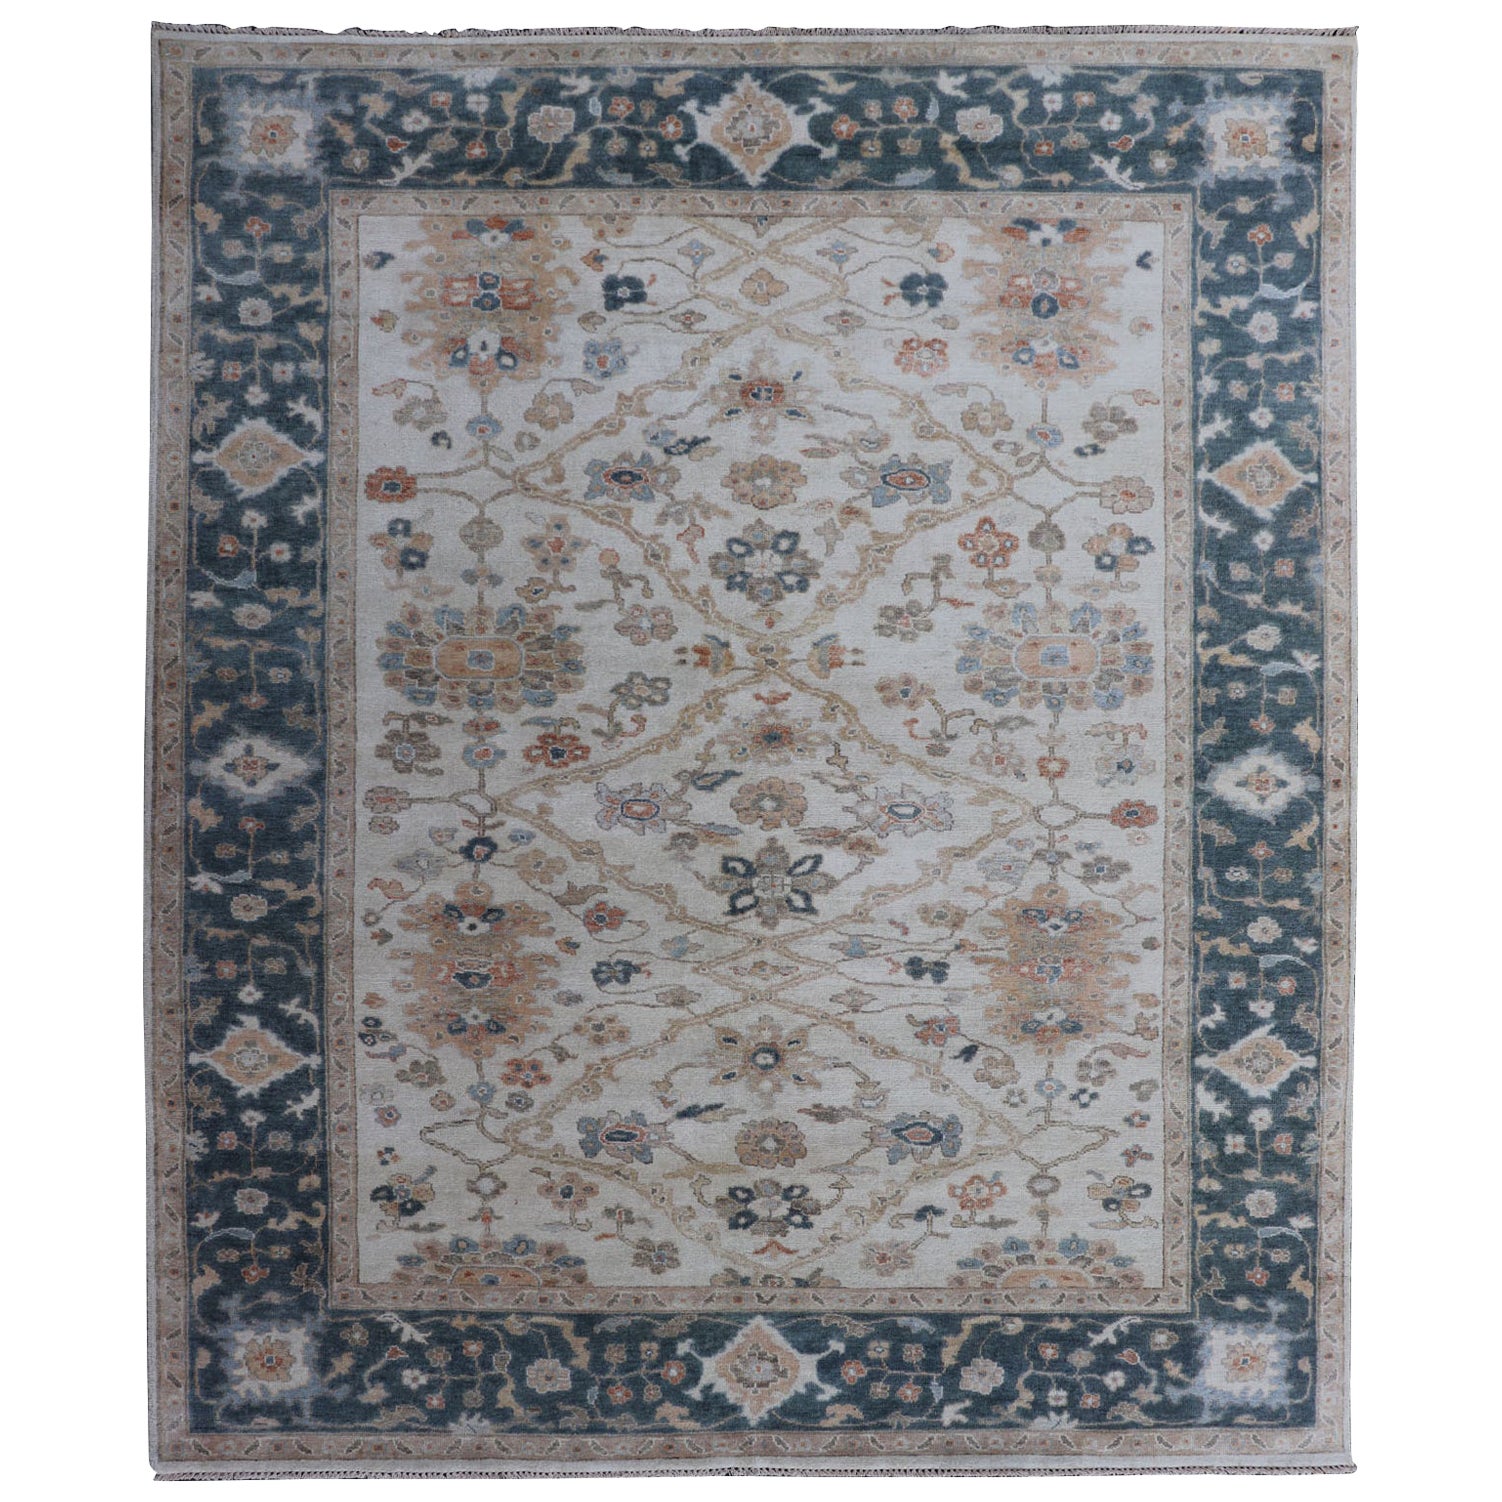 Oushak Design Rug by Keivan Woven Arts in Teal Blue, Cream and Multi Colors